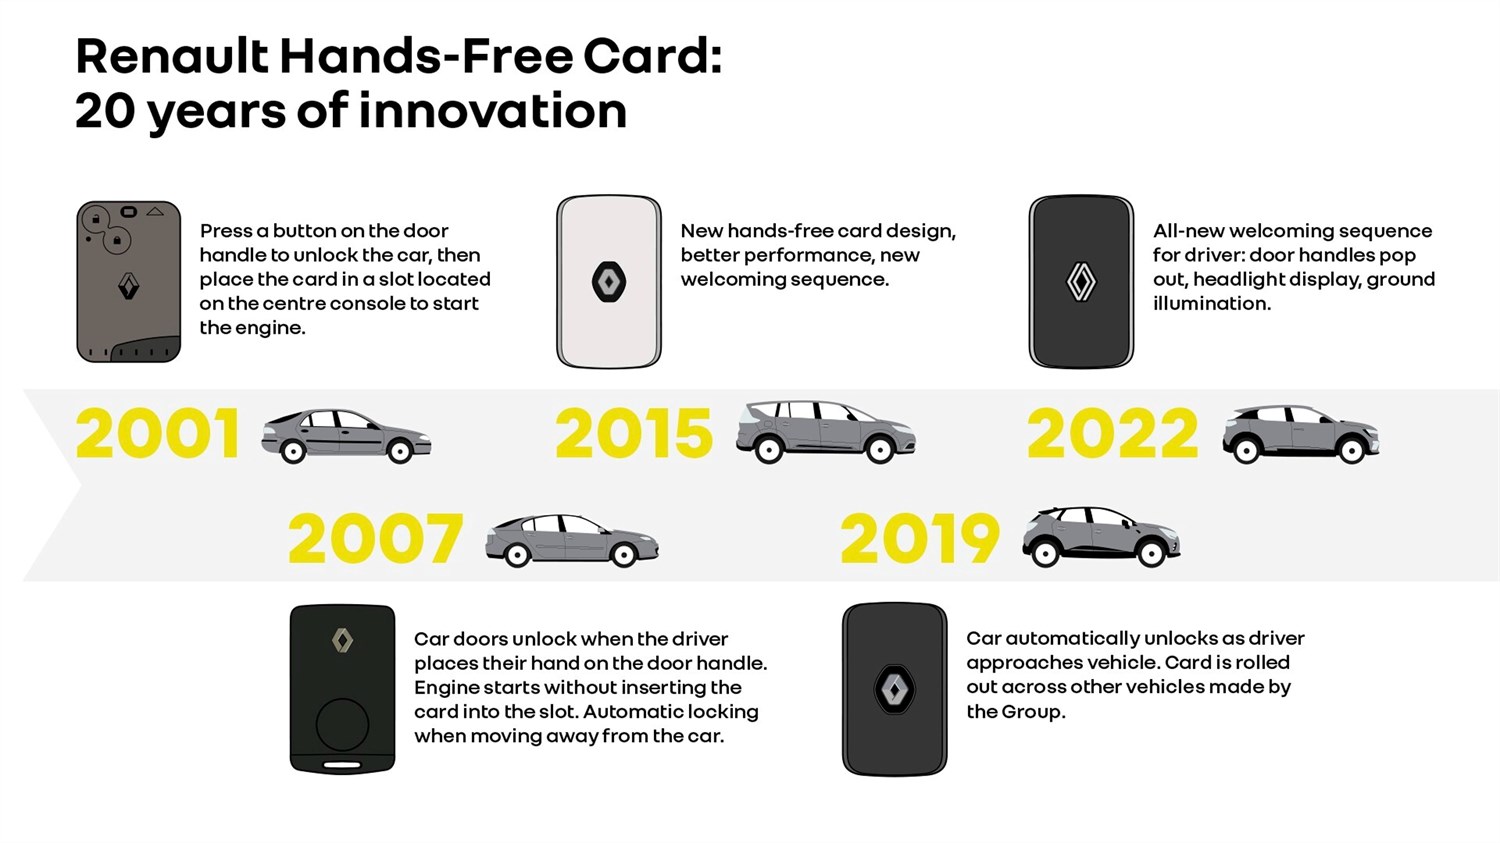 Renault hands-free key card: 20 years of innovation in the palm of your hand